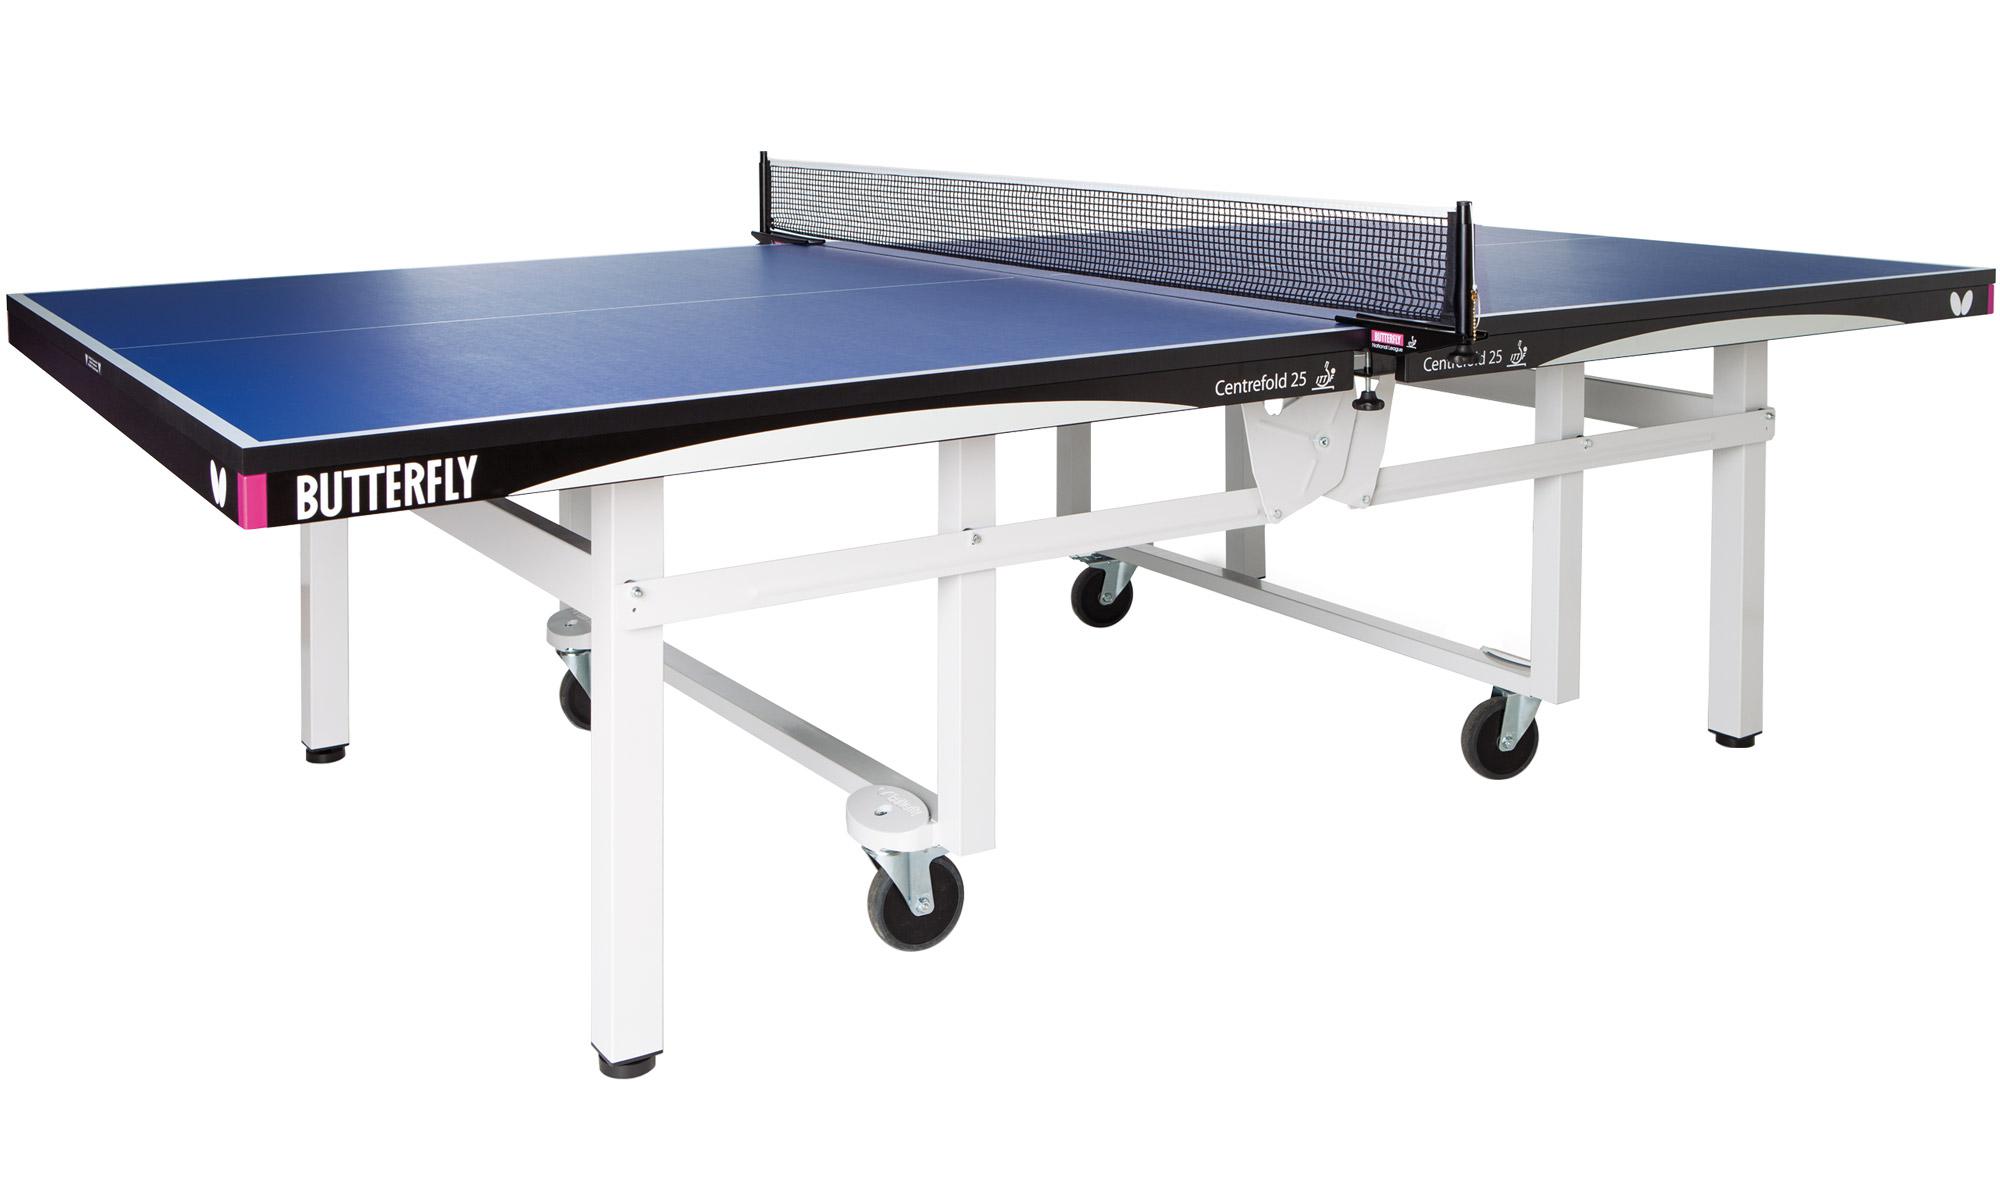 Butterfly Centrefold 25 Rollaway Indoor Table Tennis Table